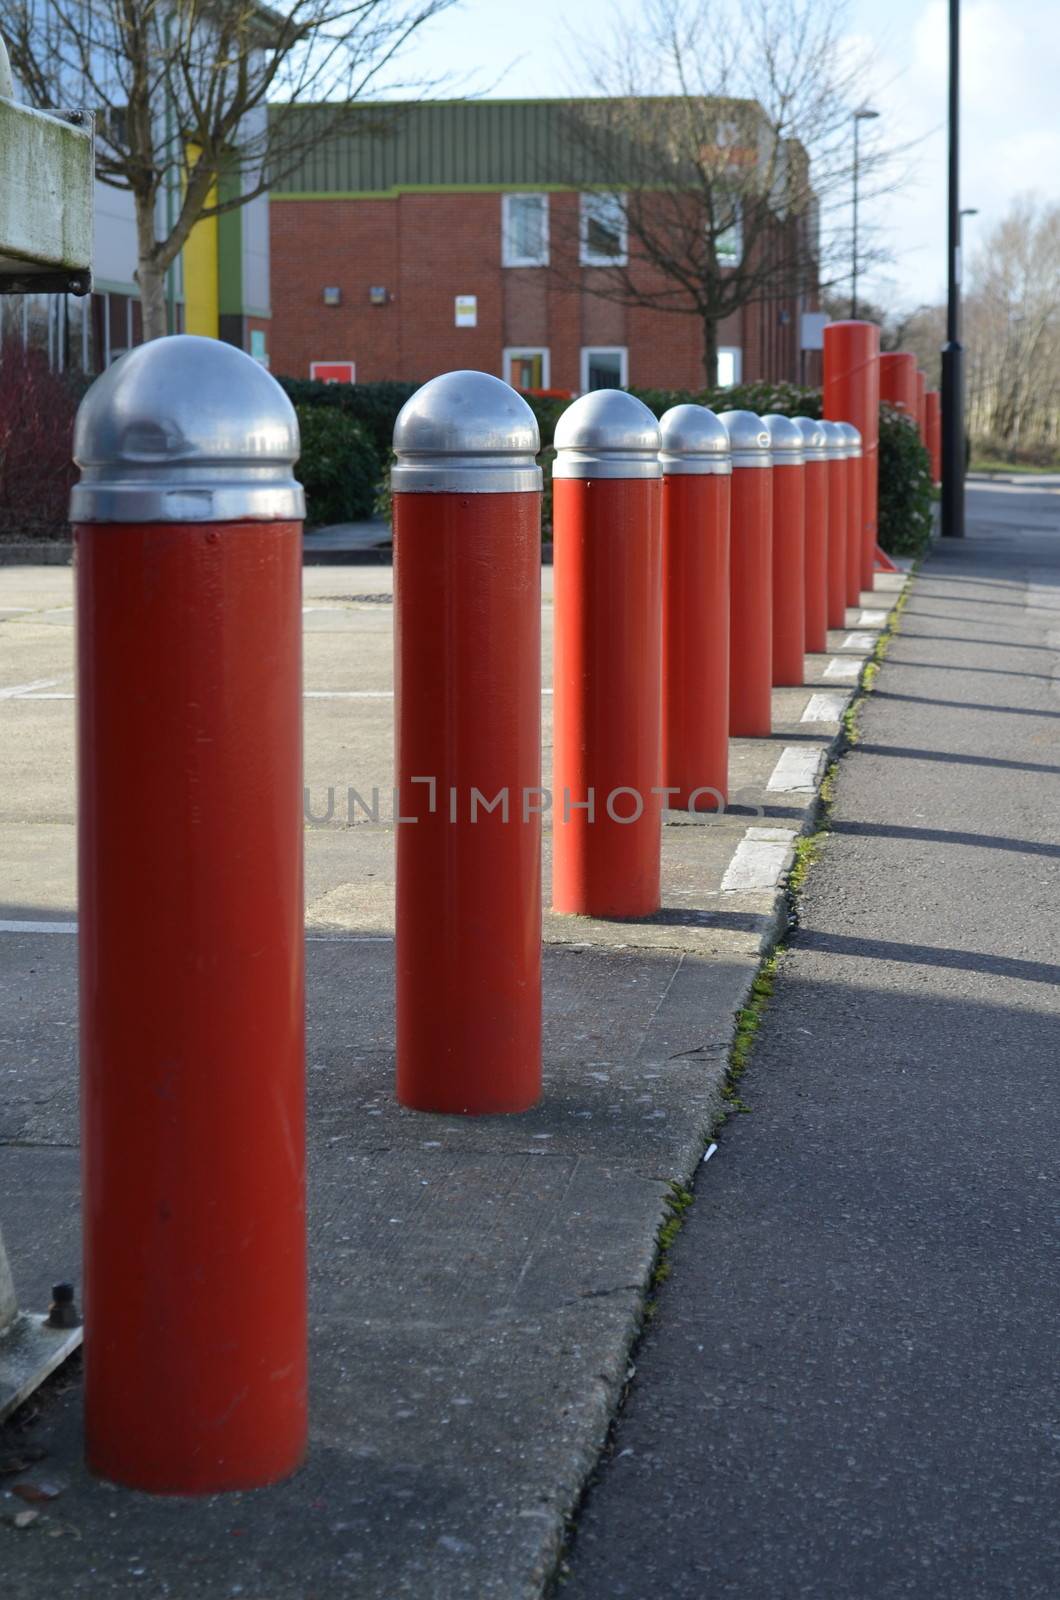 Security bollards. by bunsview